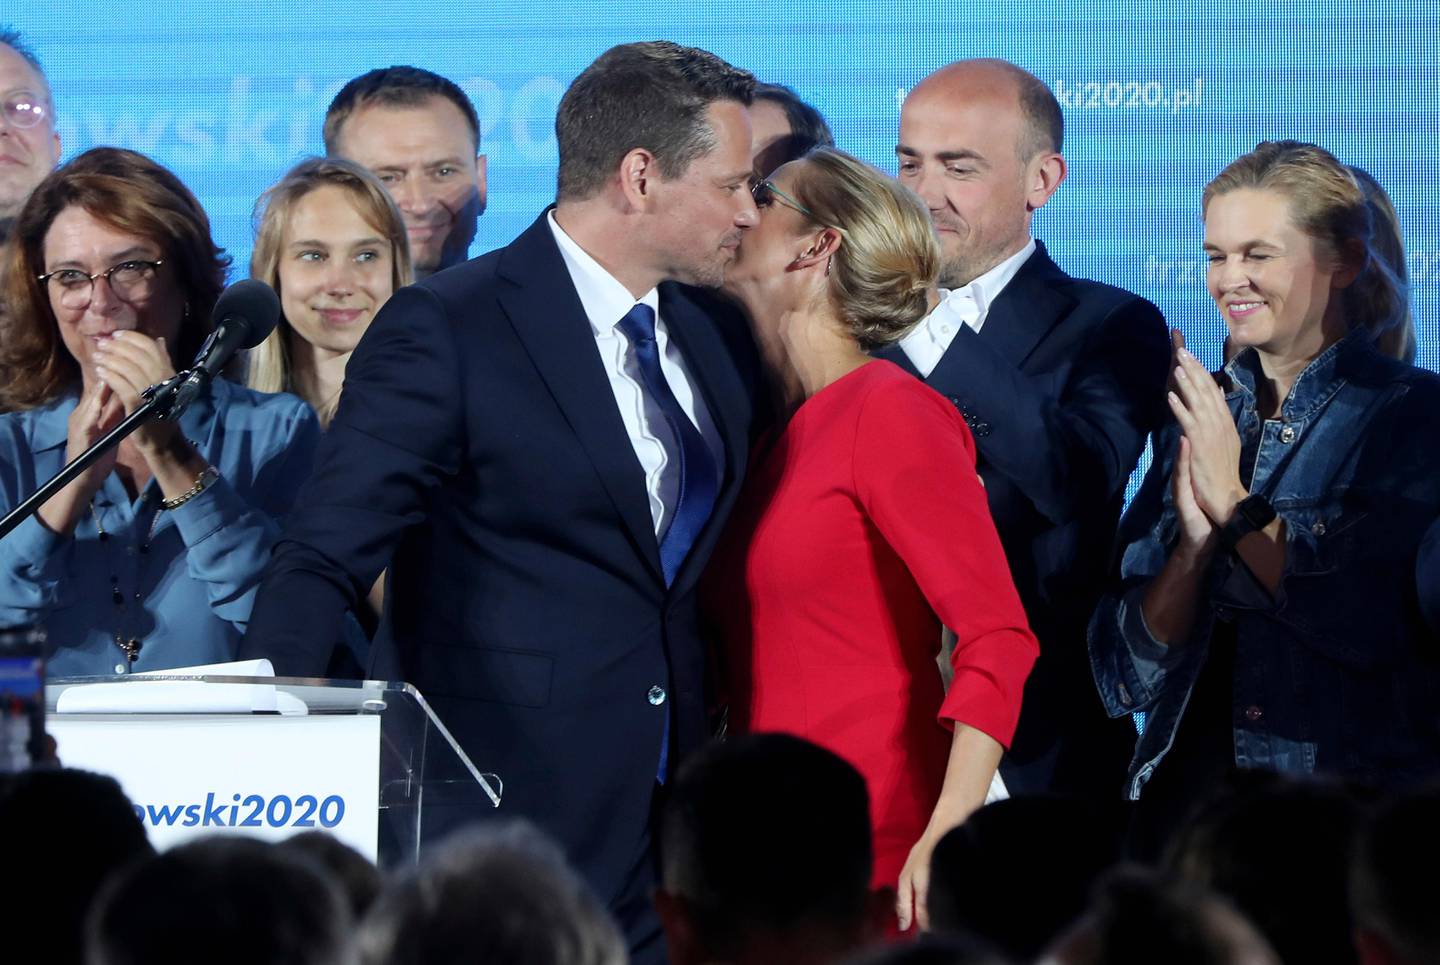 A top candidate in Poland's presidential election, Warsaw Mayor Rafal Trzaskowski,front, kisses his wife Malgorzata to exit poll after voting closed, in Warsaw, Poland, on Sunday, June 28, 2020. The poll suggests that Trzaskowski and incumbent president, Andrzej Duda, who won the most votes, will face each other in a runoff July 12. (AP Photo/Czarek Sokolowski)